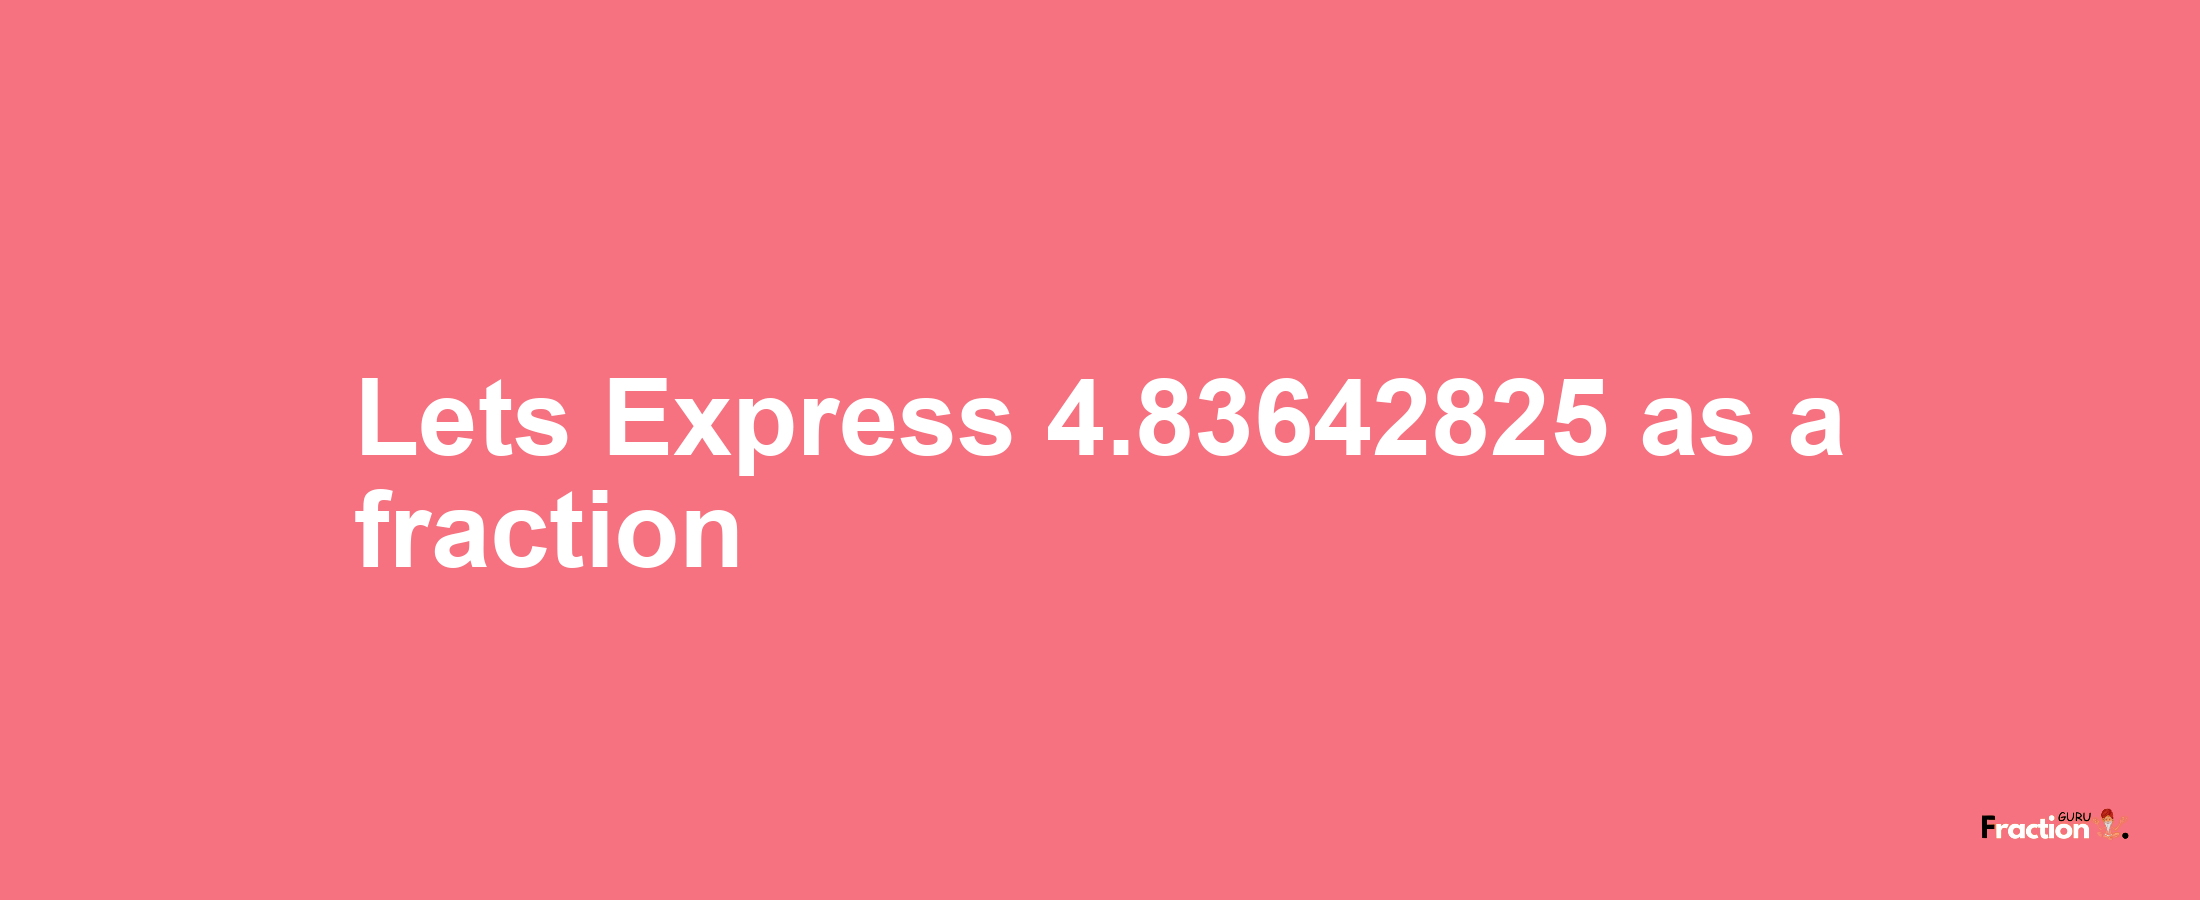 Lets Express 4.83642825 as afraction